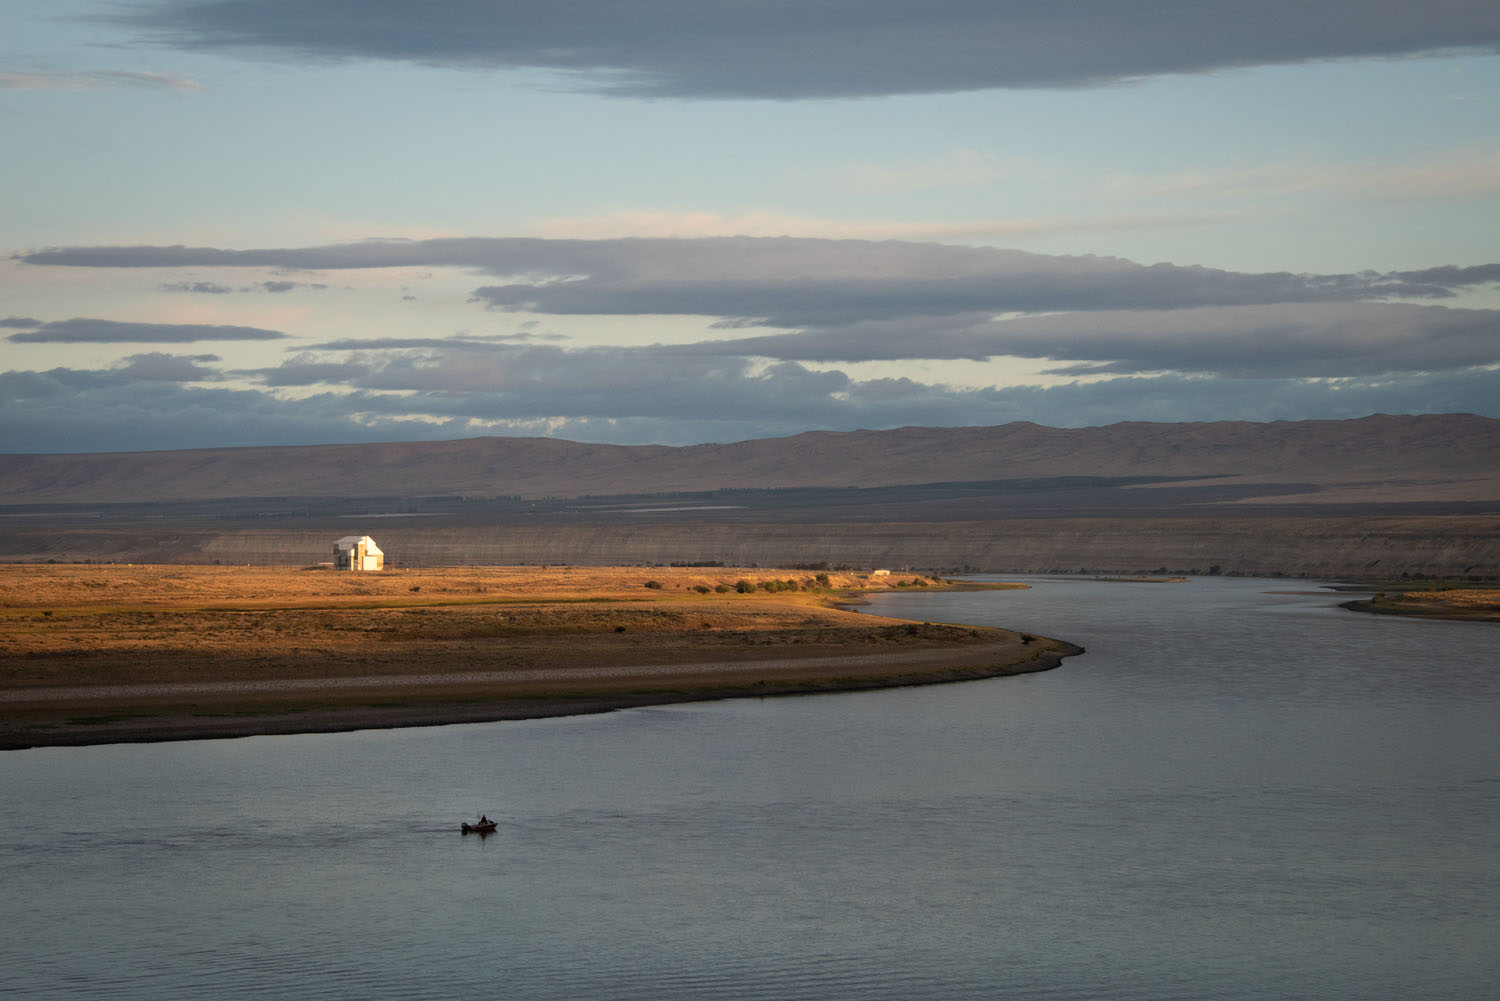 These waters are the traditional fishing grounds of the Wanapum, the Nez Perce Tribe, the Confederated Tribes and Bands of the Yakama Nation, and the Confederated Tribes of the Umatilla Indian Reservation. Photography by Sean McDermott.